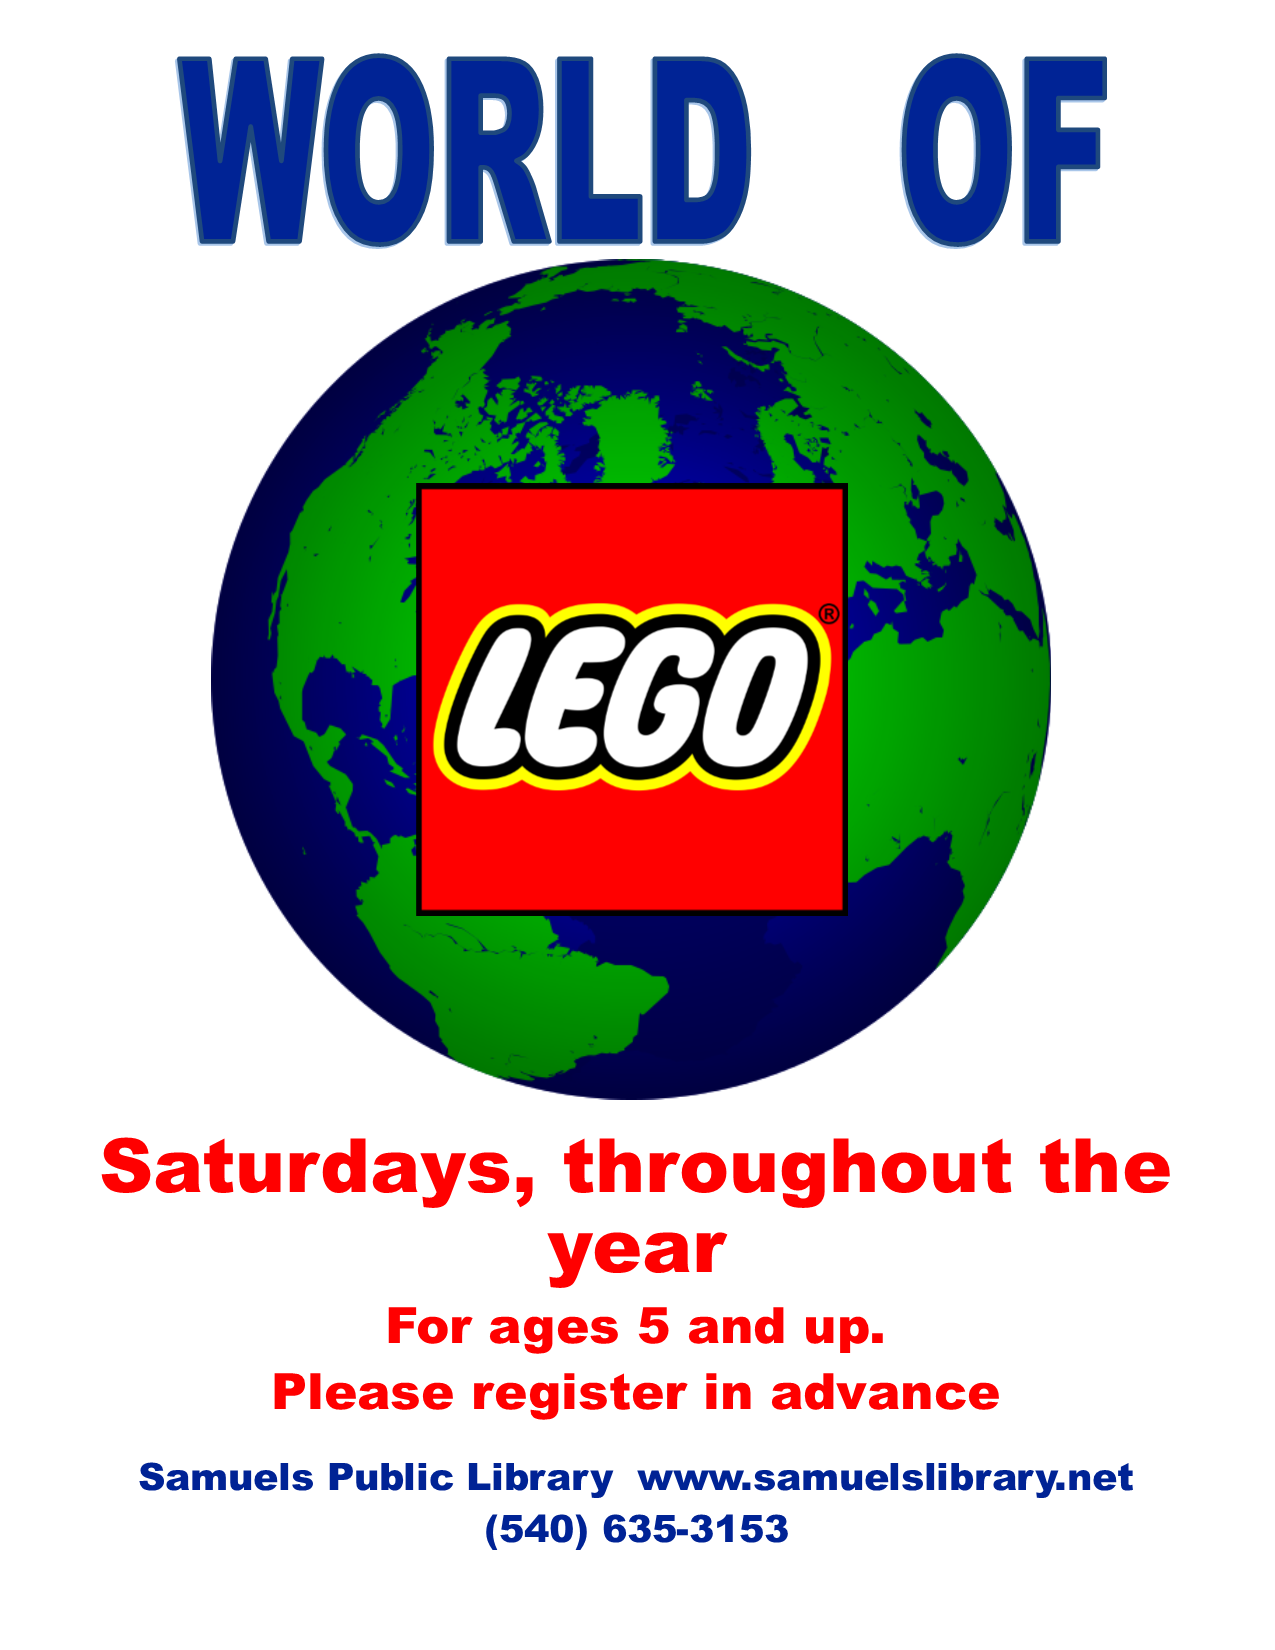 World of Lego for ages 5 and up.